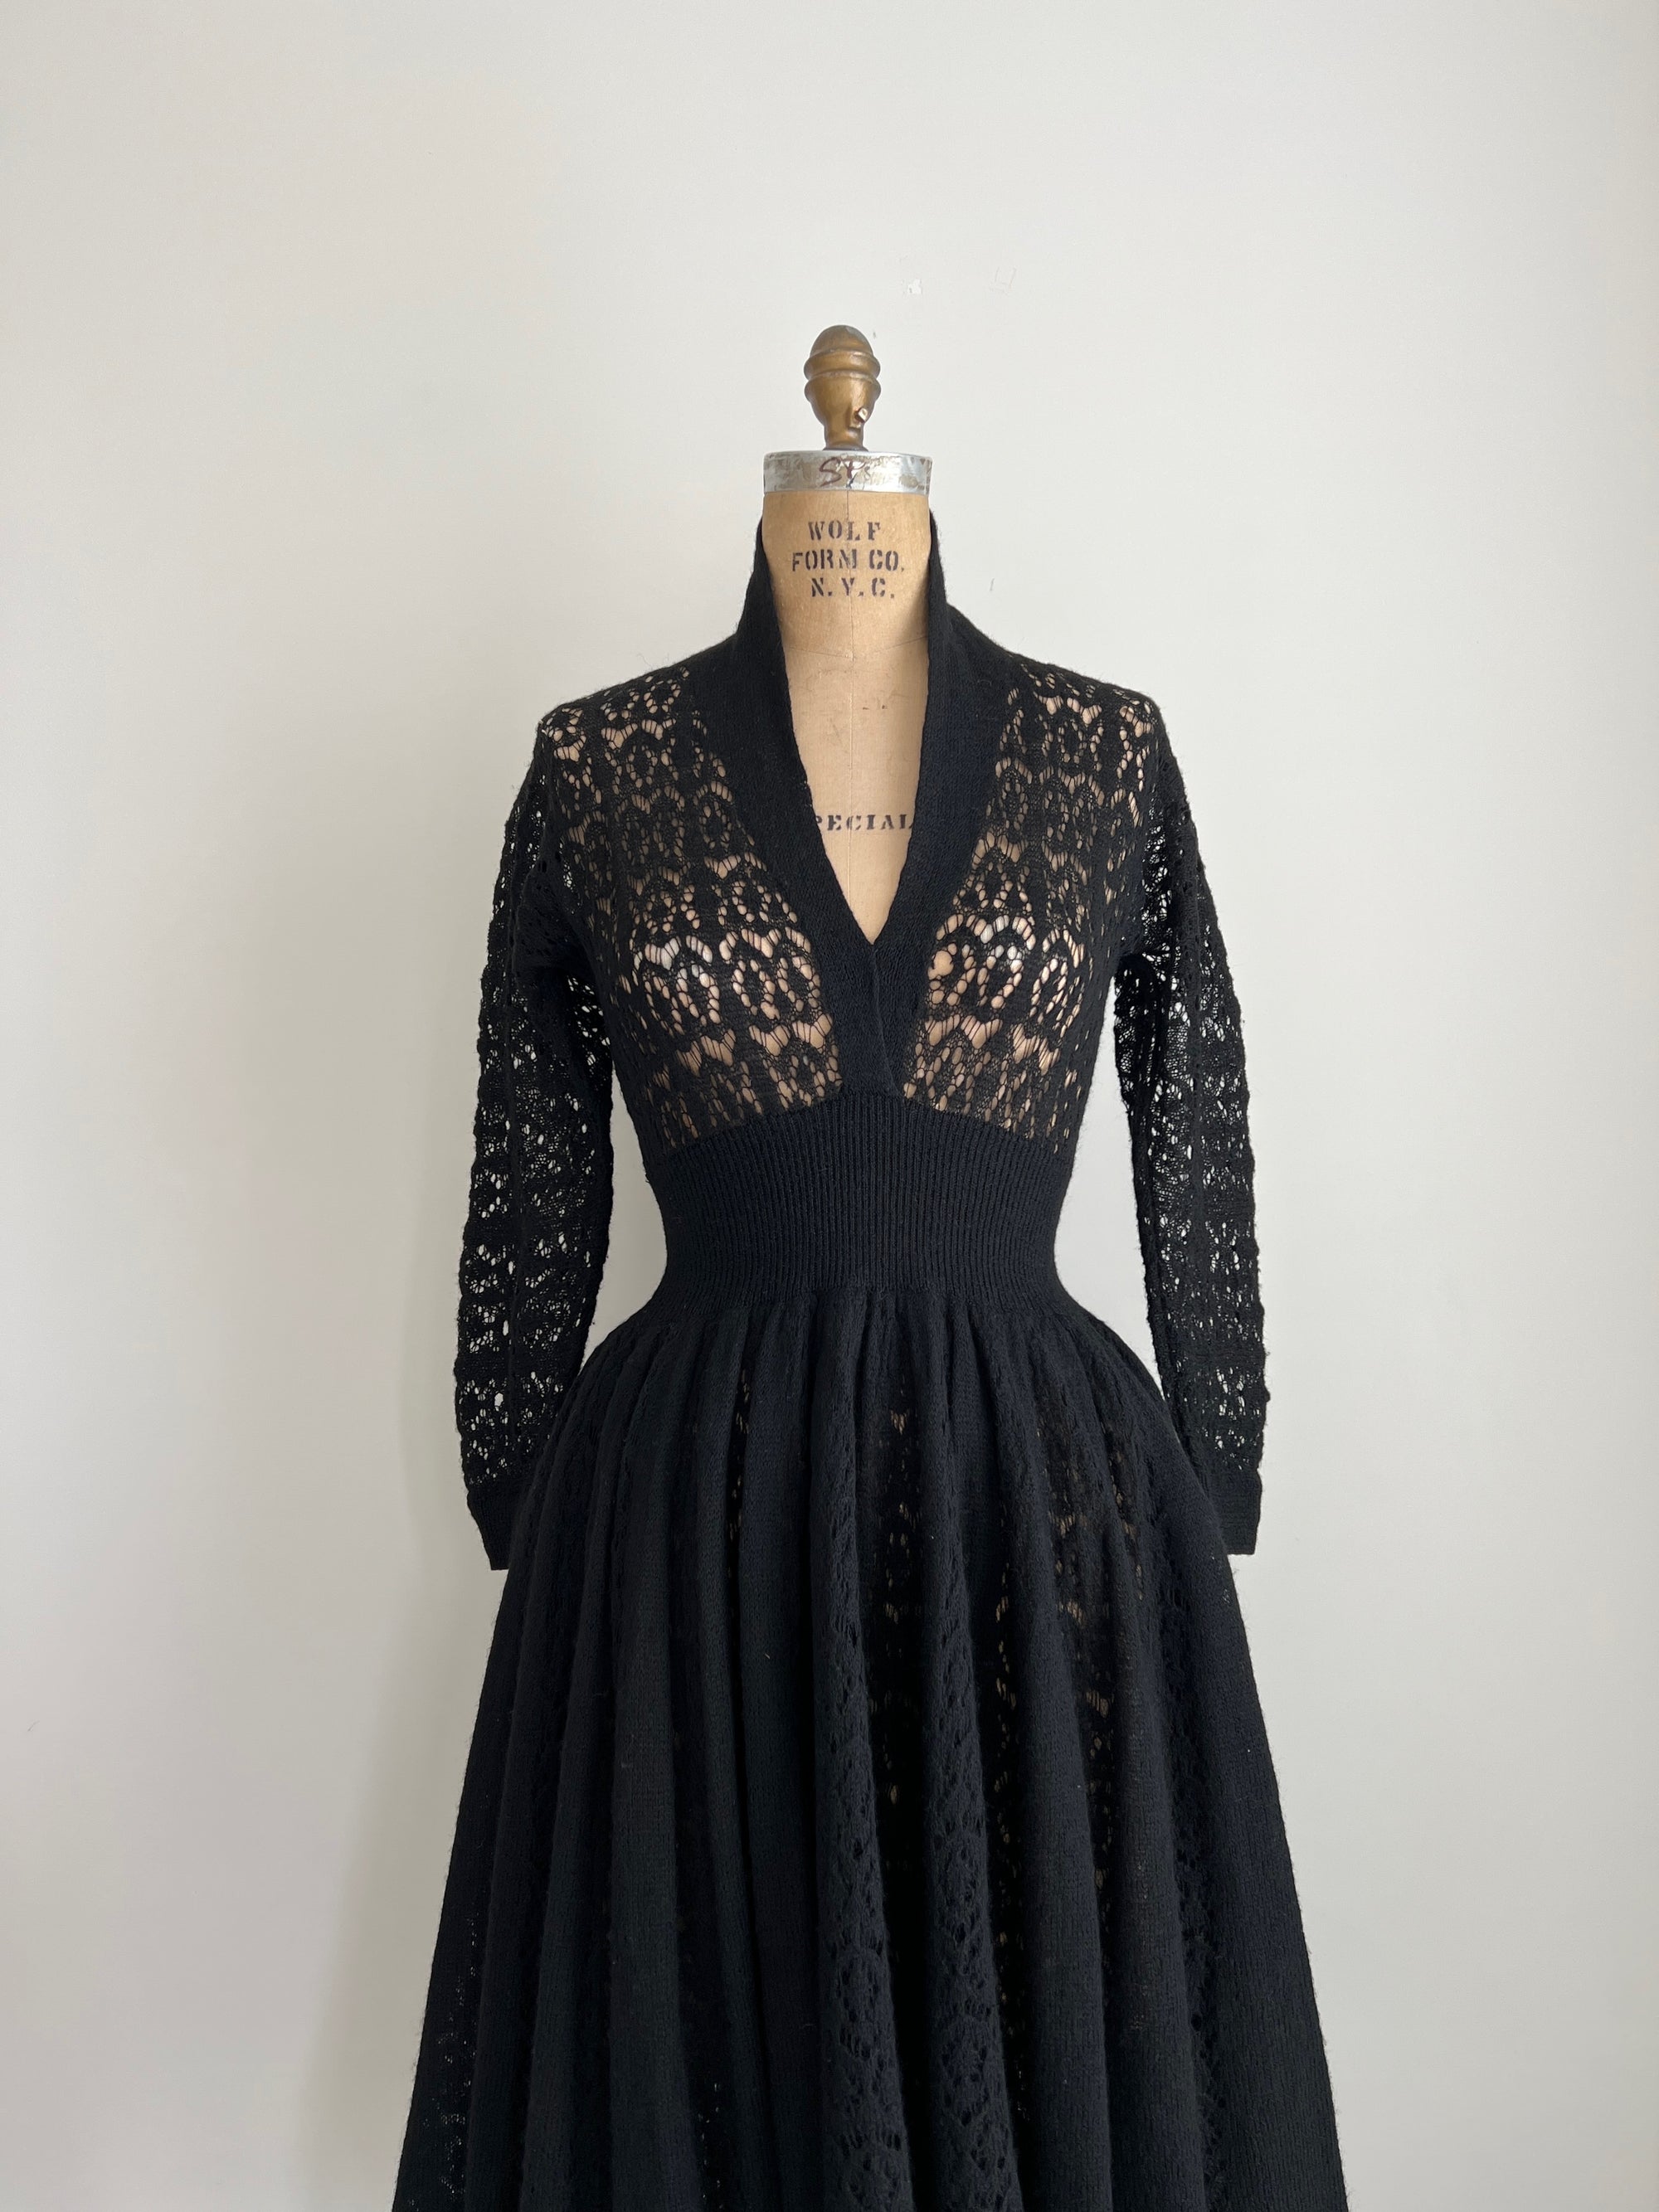 1950s/60s Black Knit Dress / Small-Medium / Sold As-Is